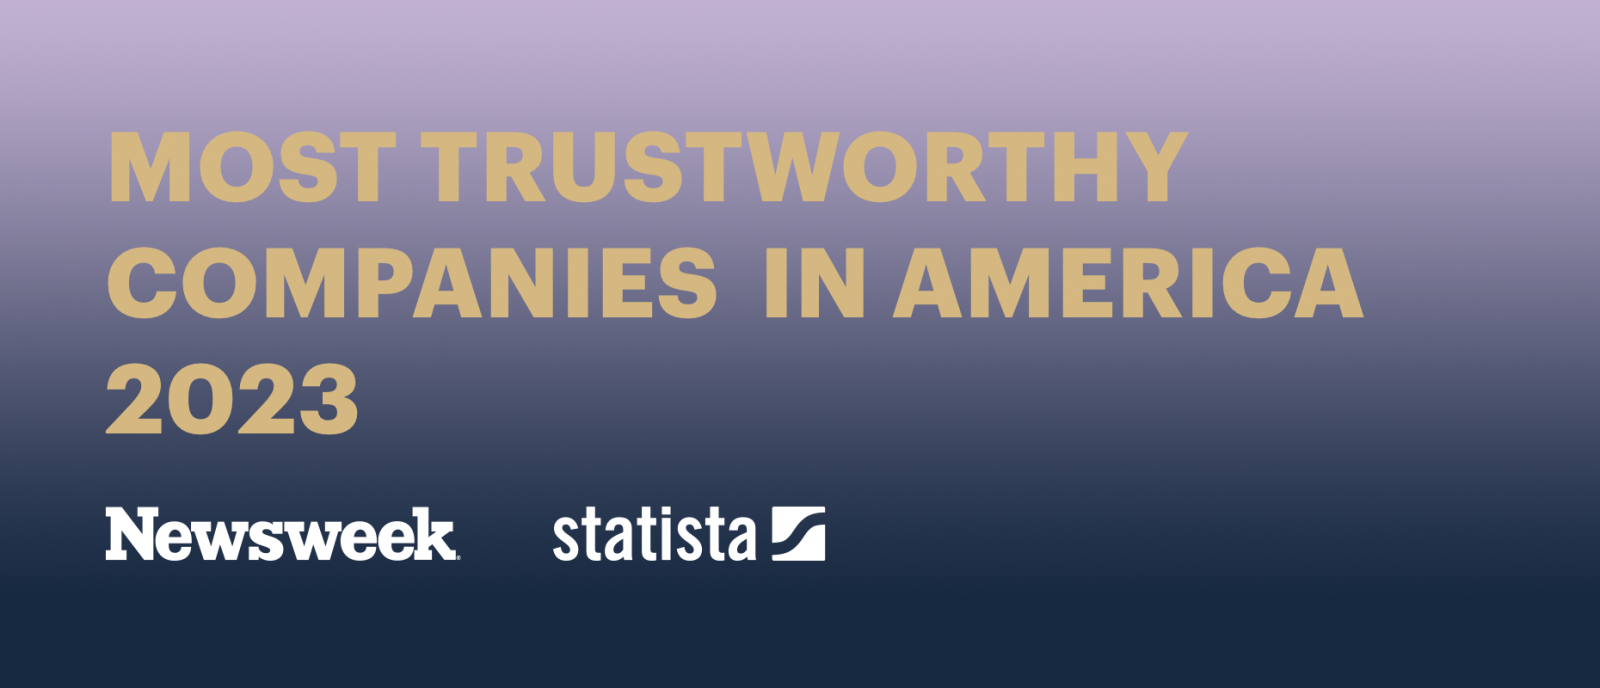 Magellan named to Newsweek’s 2023 List of the “Most Trustworthy Companies in America.” illustration